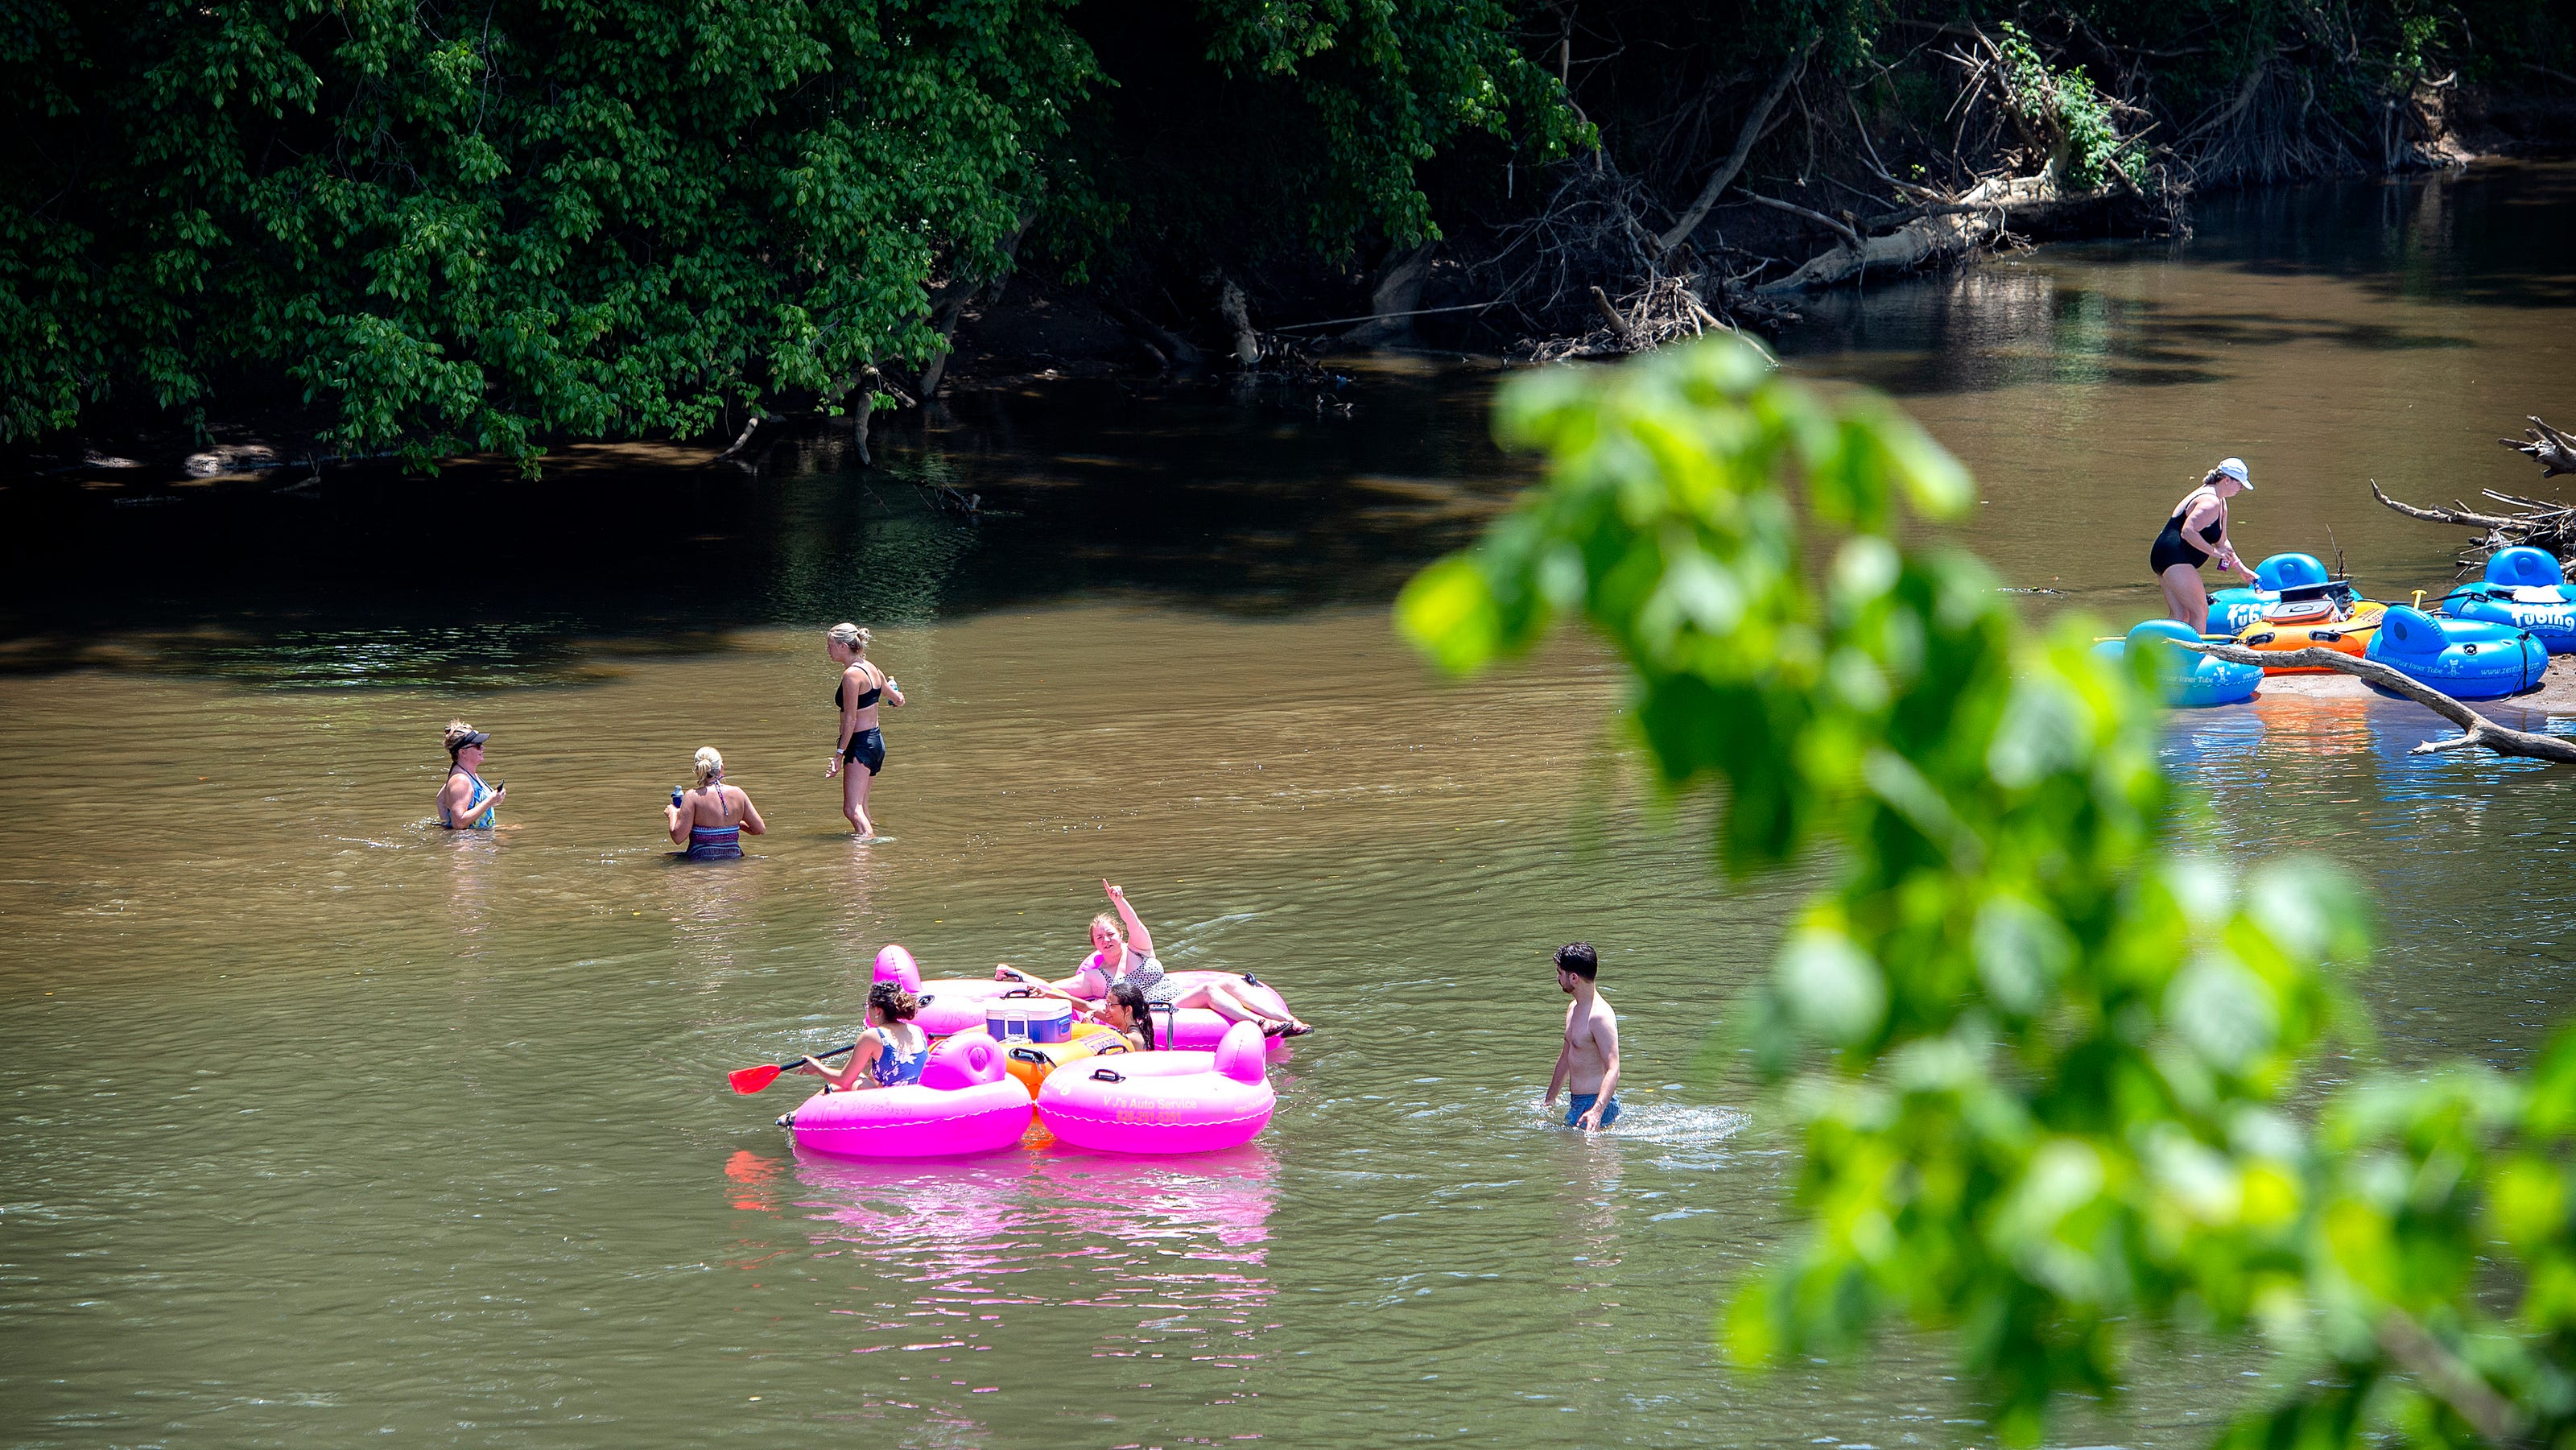 French Broad River in Asheville showing higher levels of E. coli bacteria this summer - Citizen Times